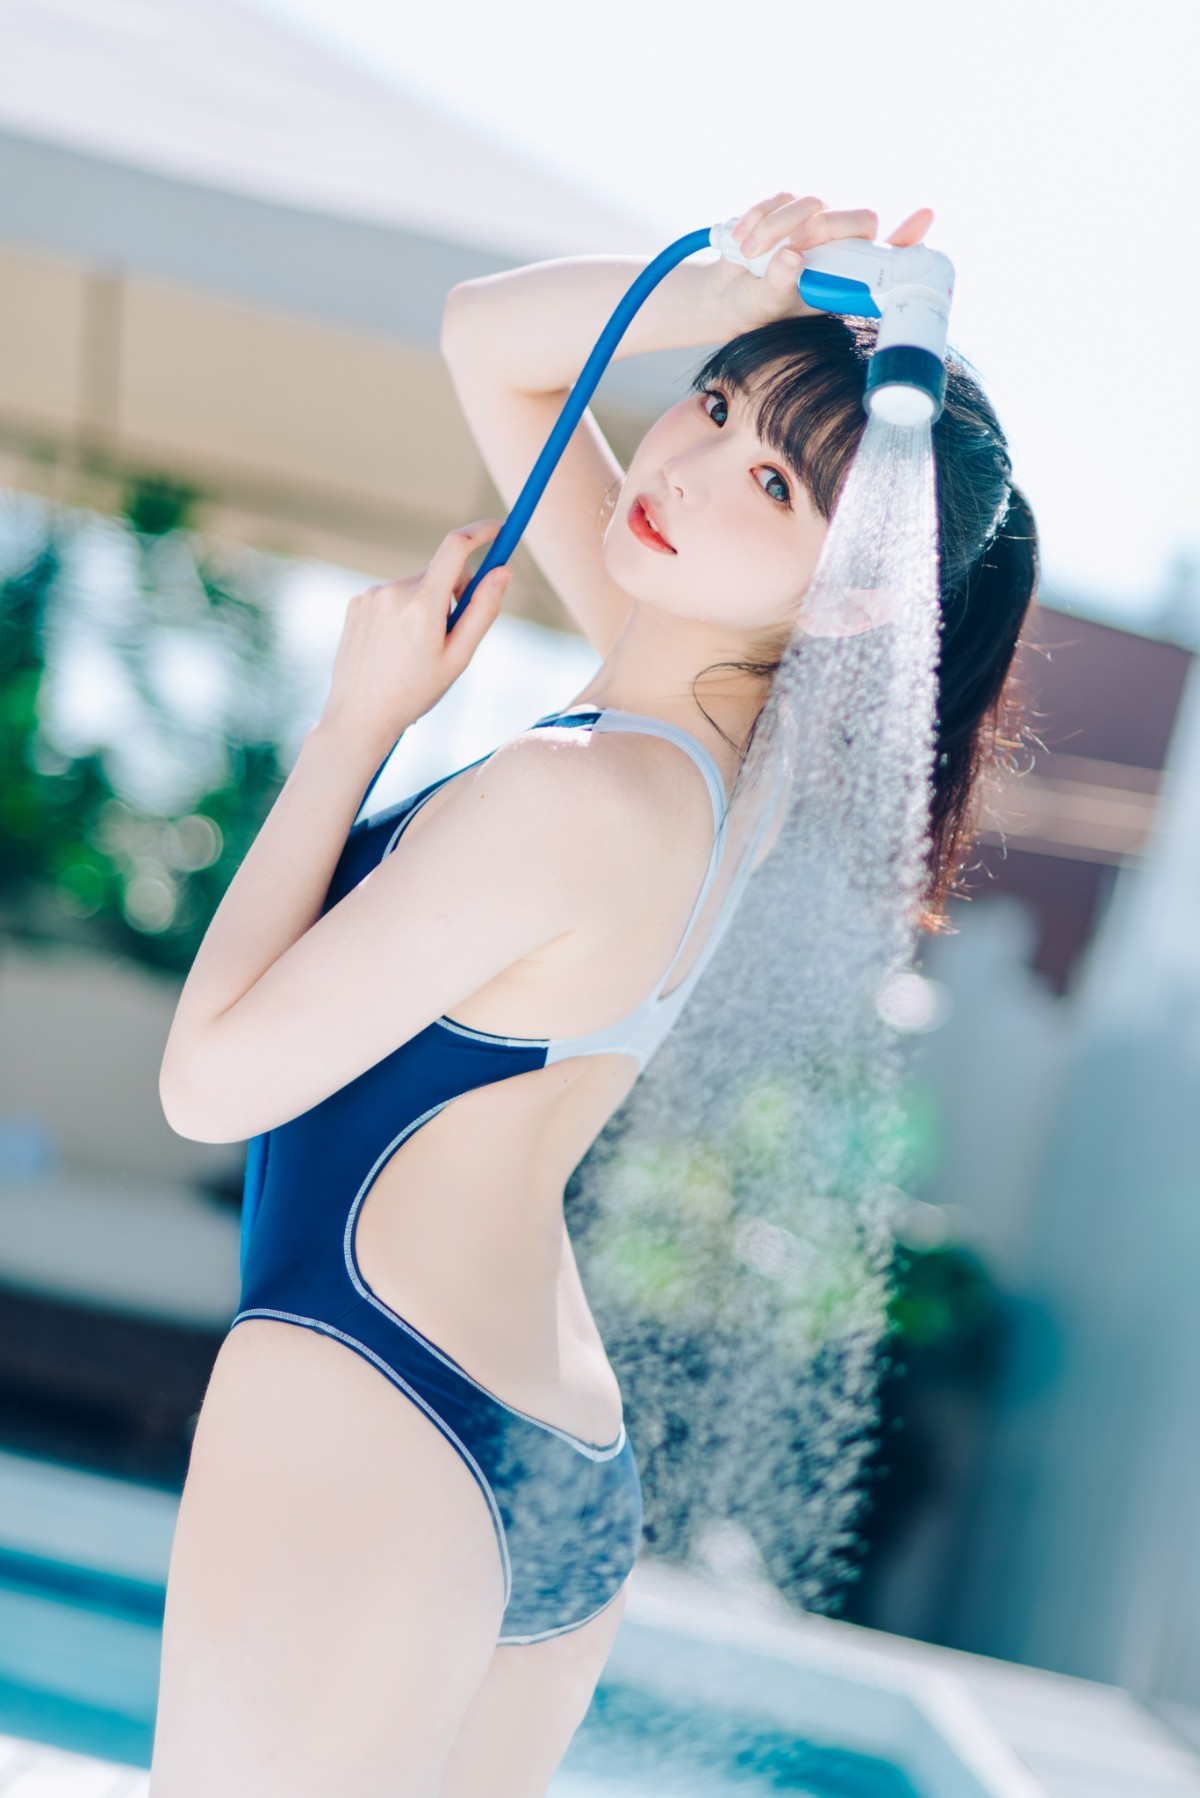 Coser@霜月shimo Vol.004 Summer 0067 5008512696